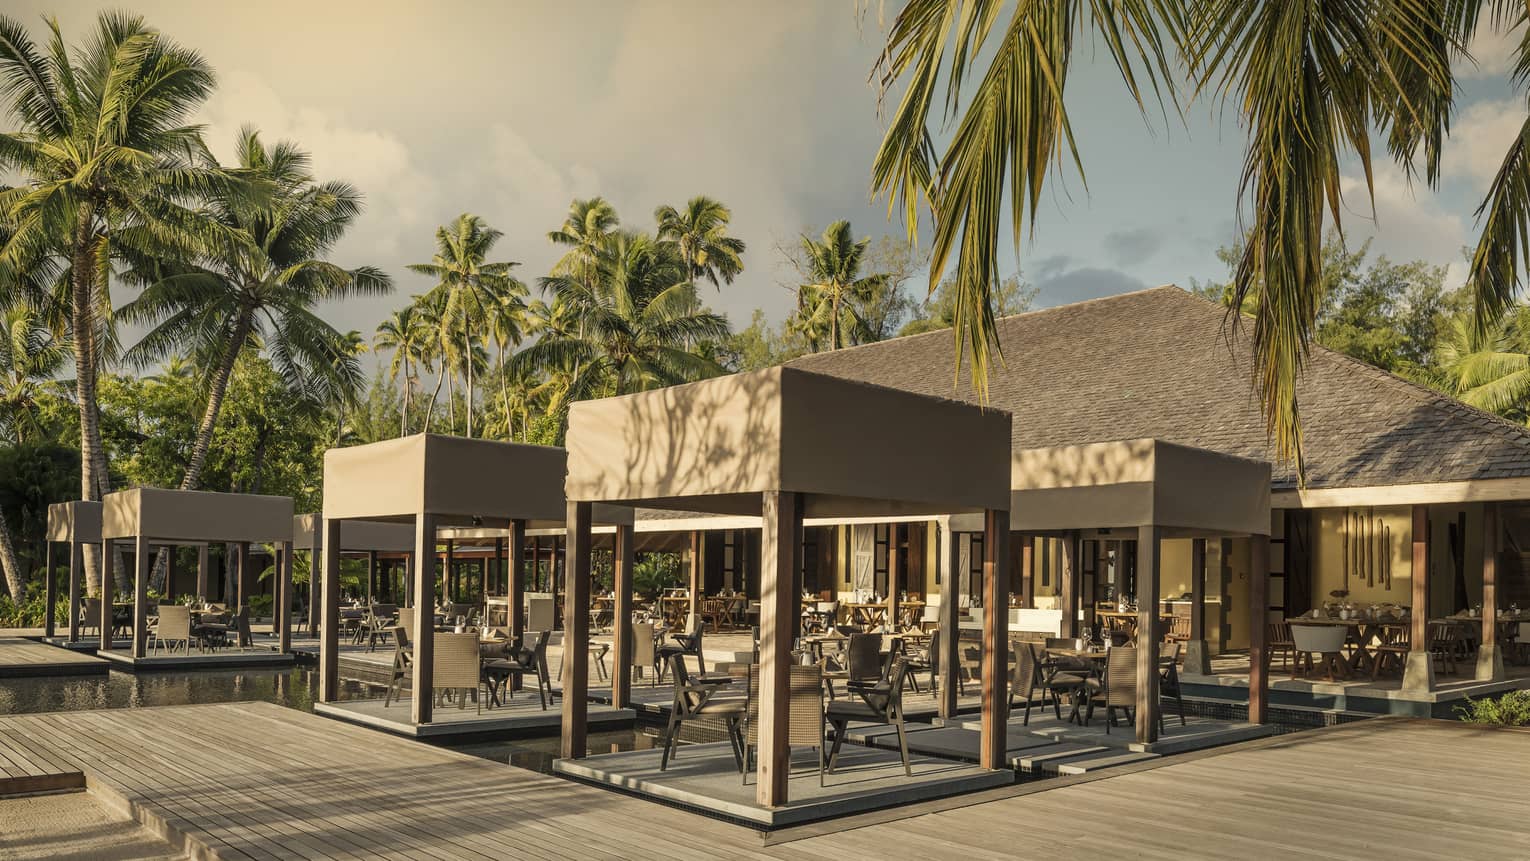 Outdoor Claudine restaurant with tables on decks over water, covered with wooden canopy 